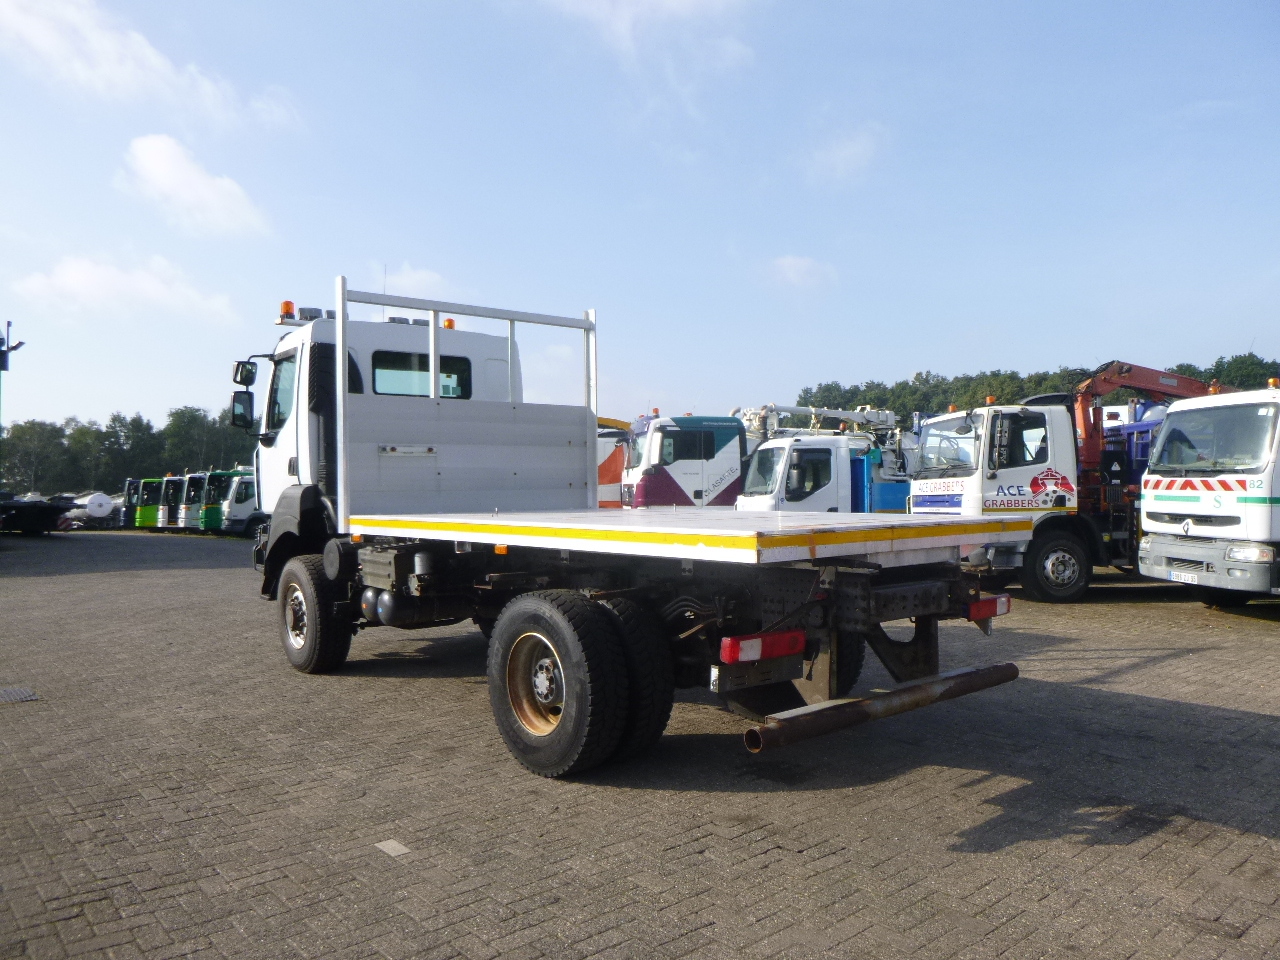 Cab chassis truck Renault Kerax 380 DXI 4x4 Euro 5 + Hydraulics: picture 4